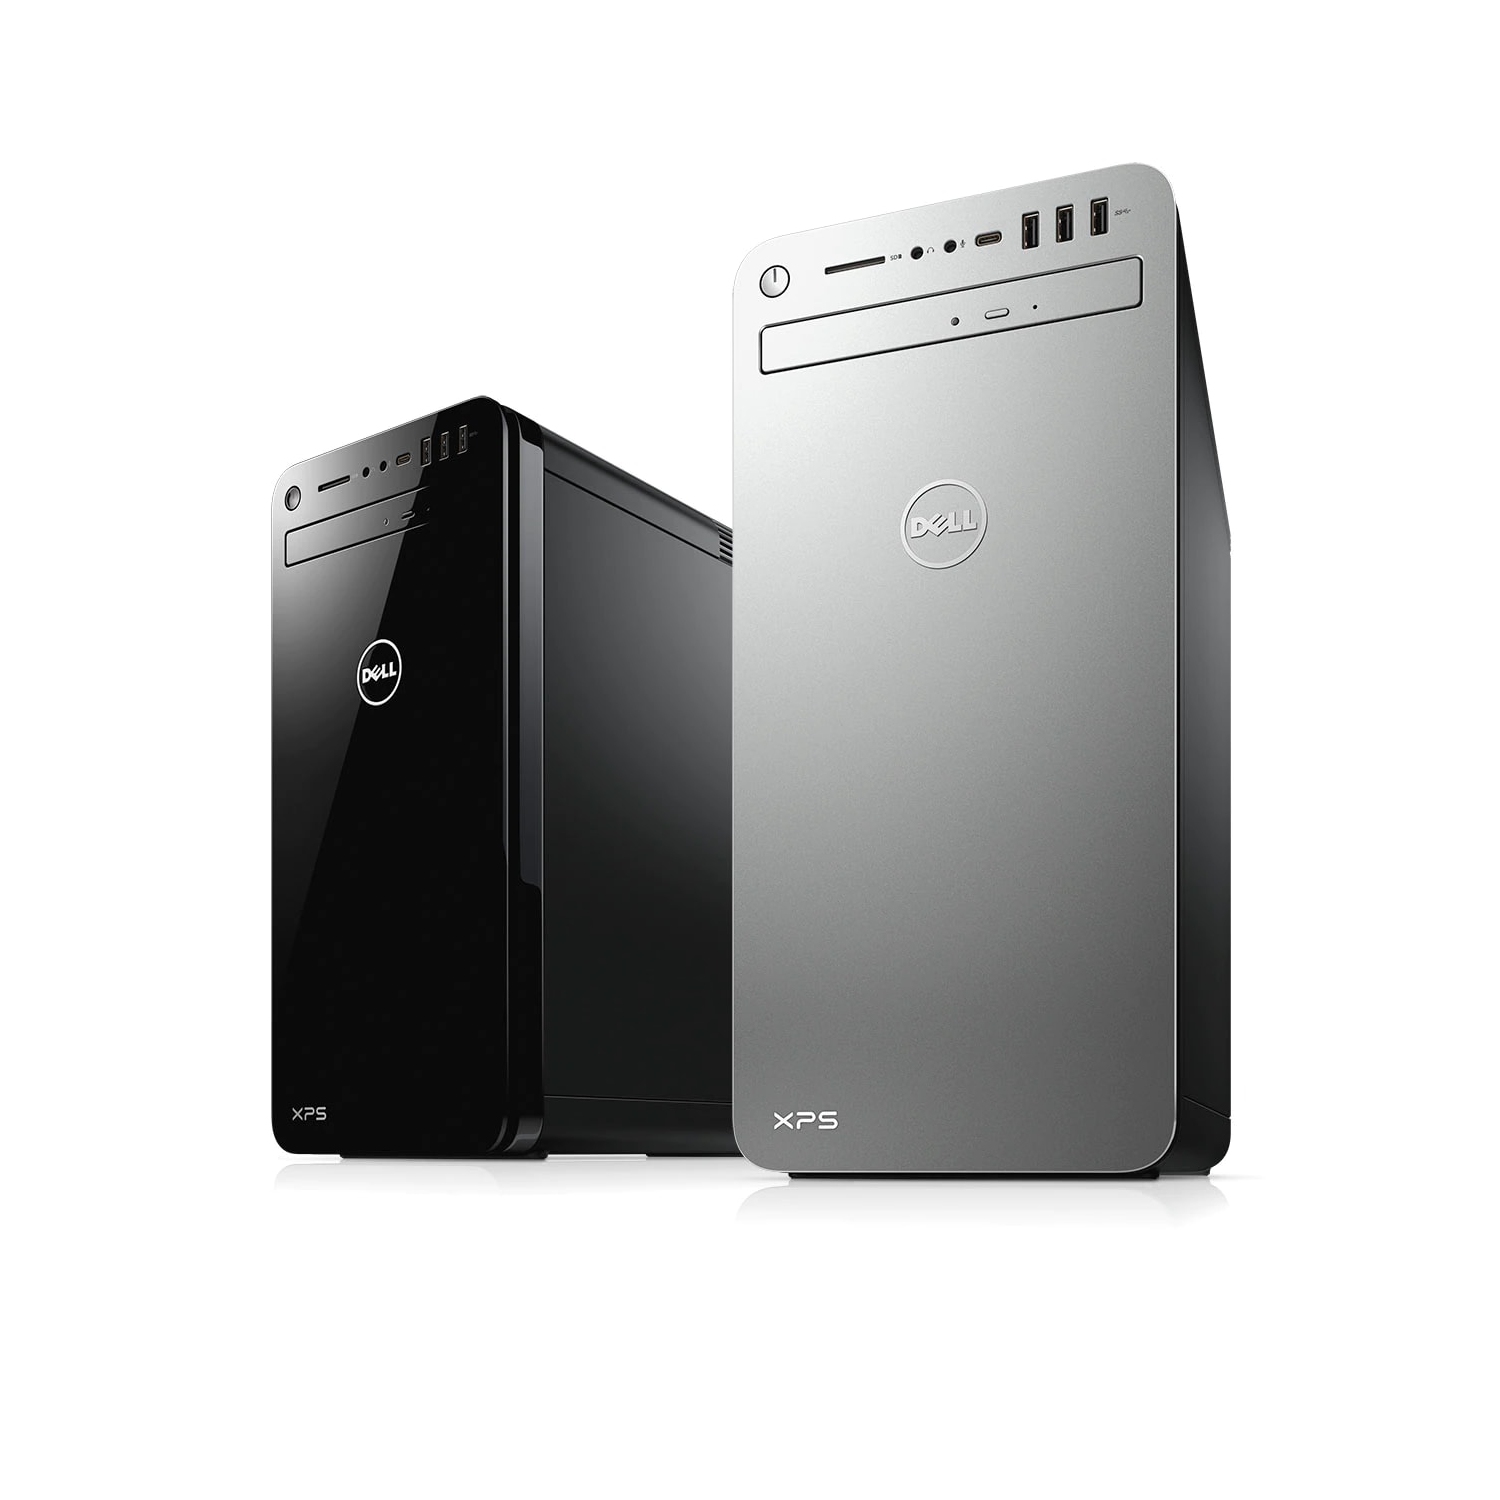 Refurbished (Excellent) Dell XPS 8930 Desktop | Core i7-8700 - 1TB SSD Hard Drive - 16GB RAM - Nvidia GeForce GTX 1080 | 6 cores @ 4.6 GHz - 8GB GDDR5X Win 10 Home Silver